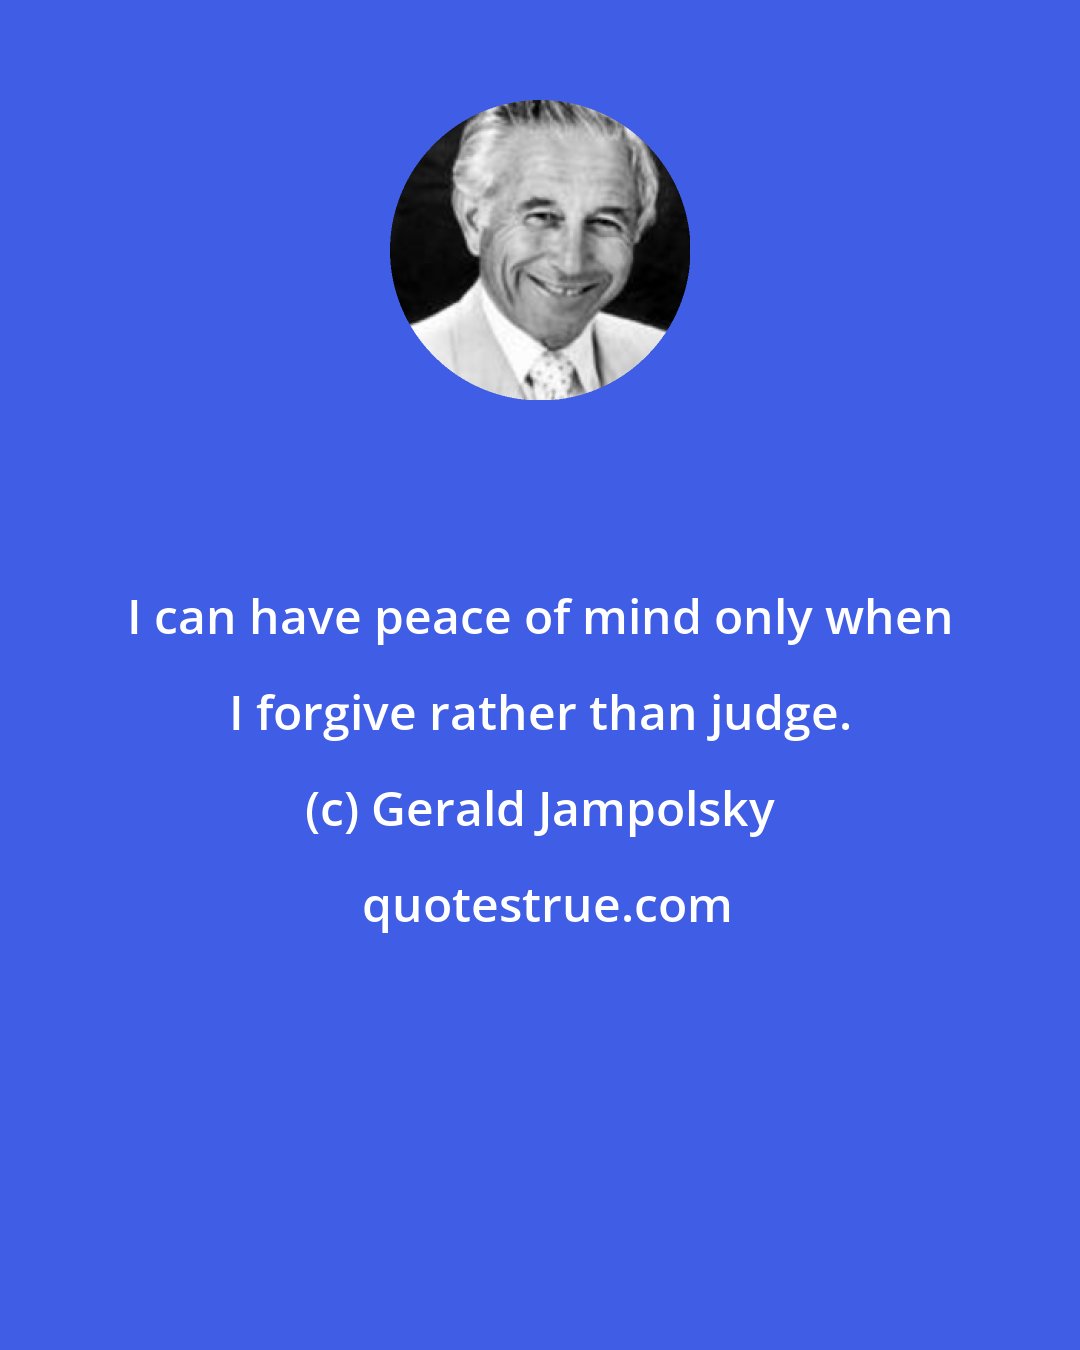 Gerald Jampolsky: I can have peace of mind only when I forgive rather than judge.